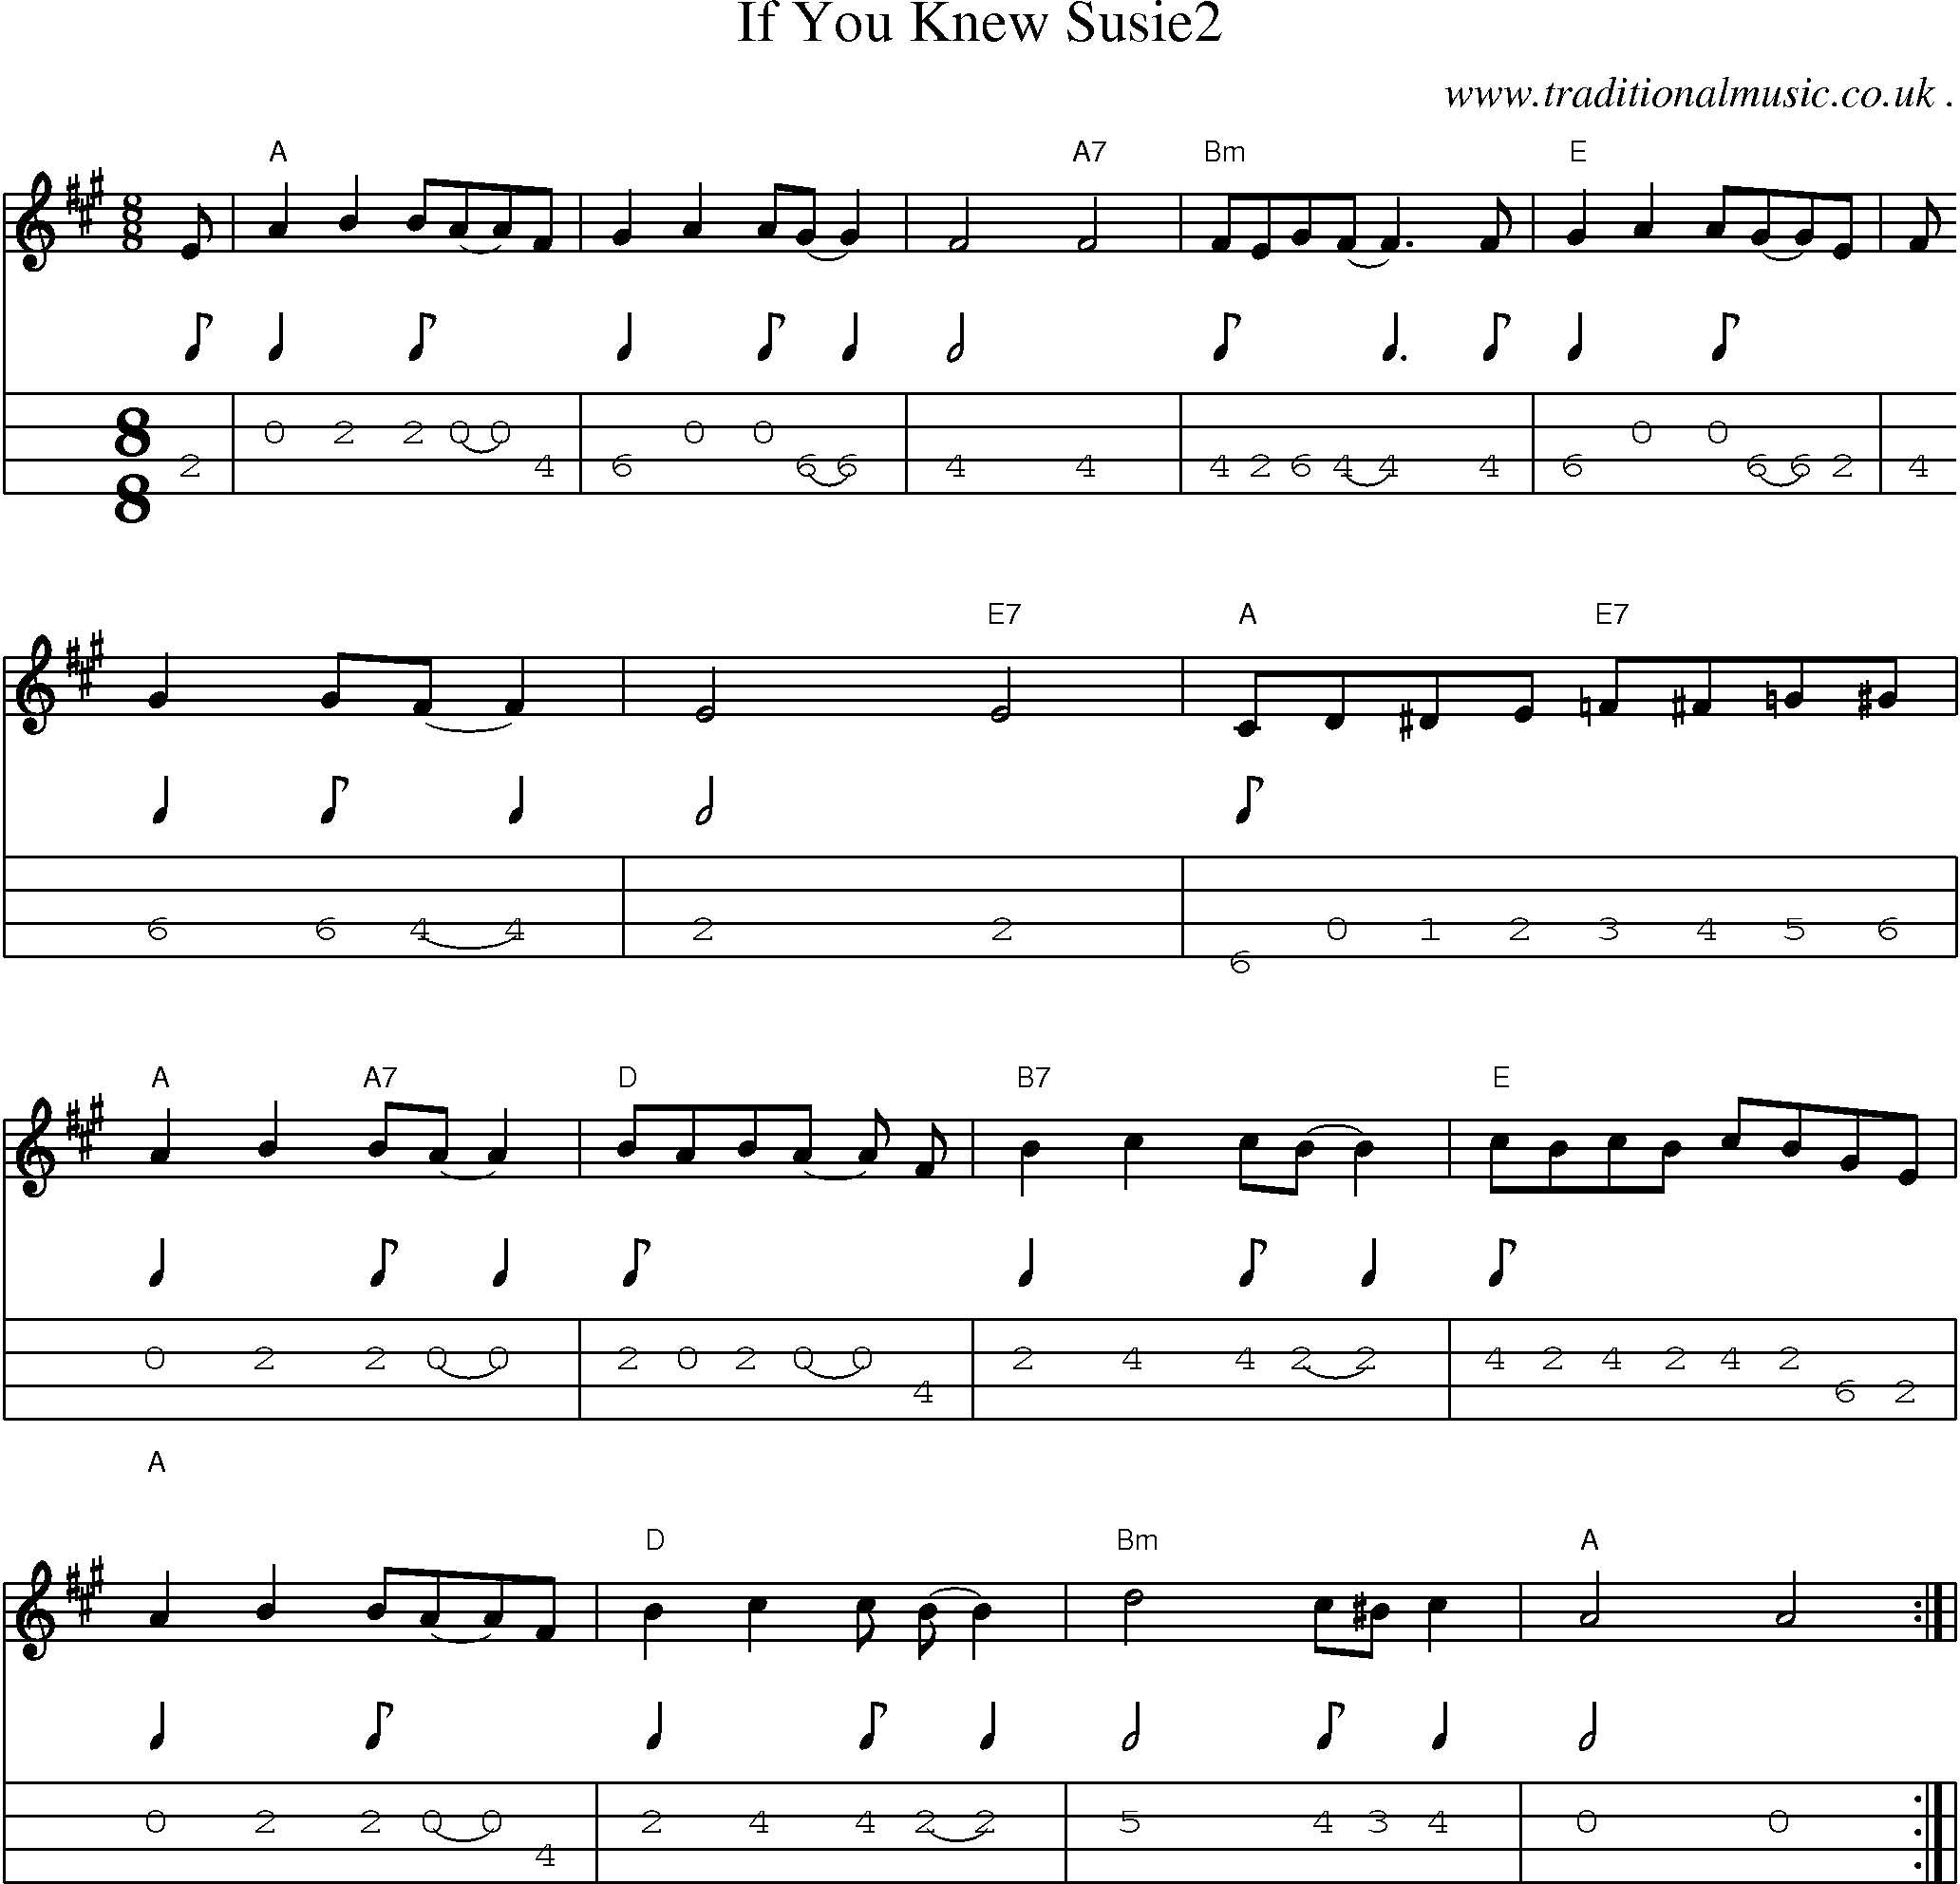 Music Score and Mandolin Tabs for If You Knew Susie2